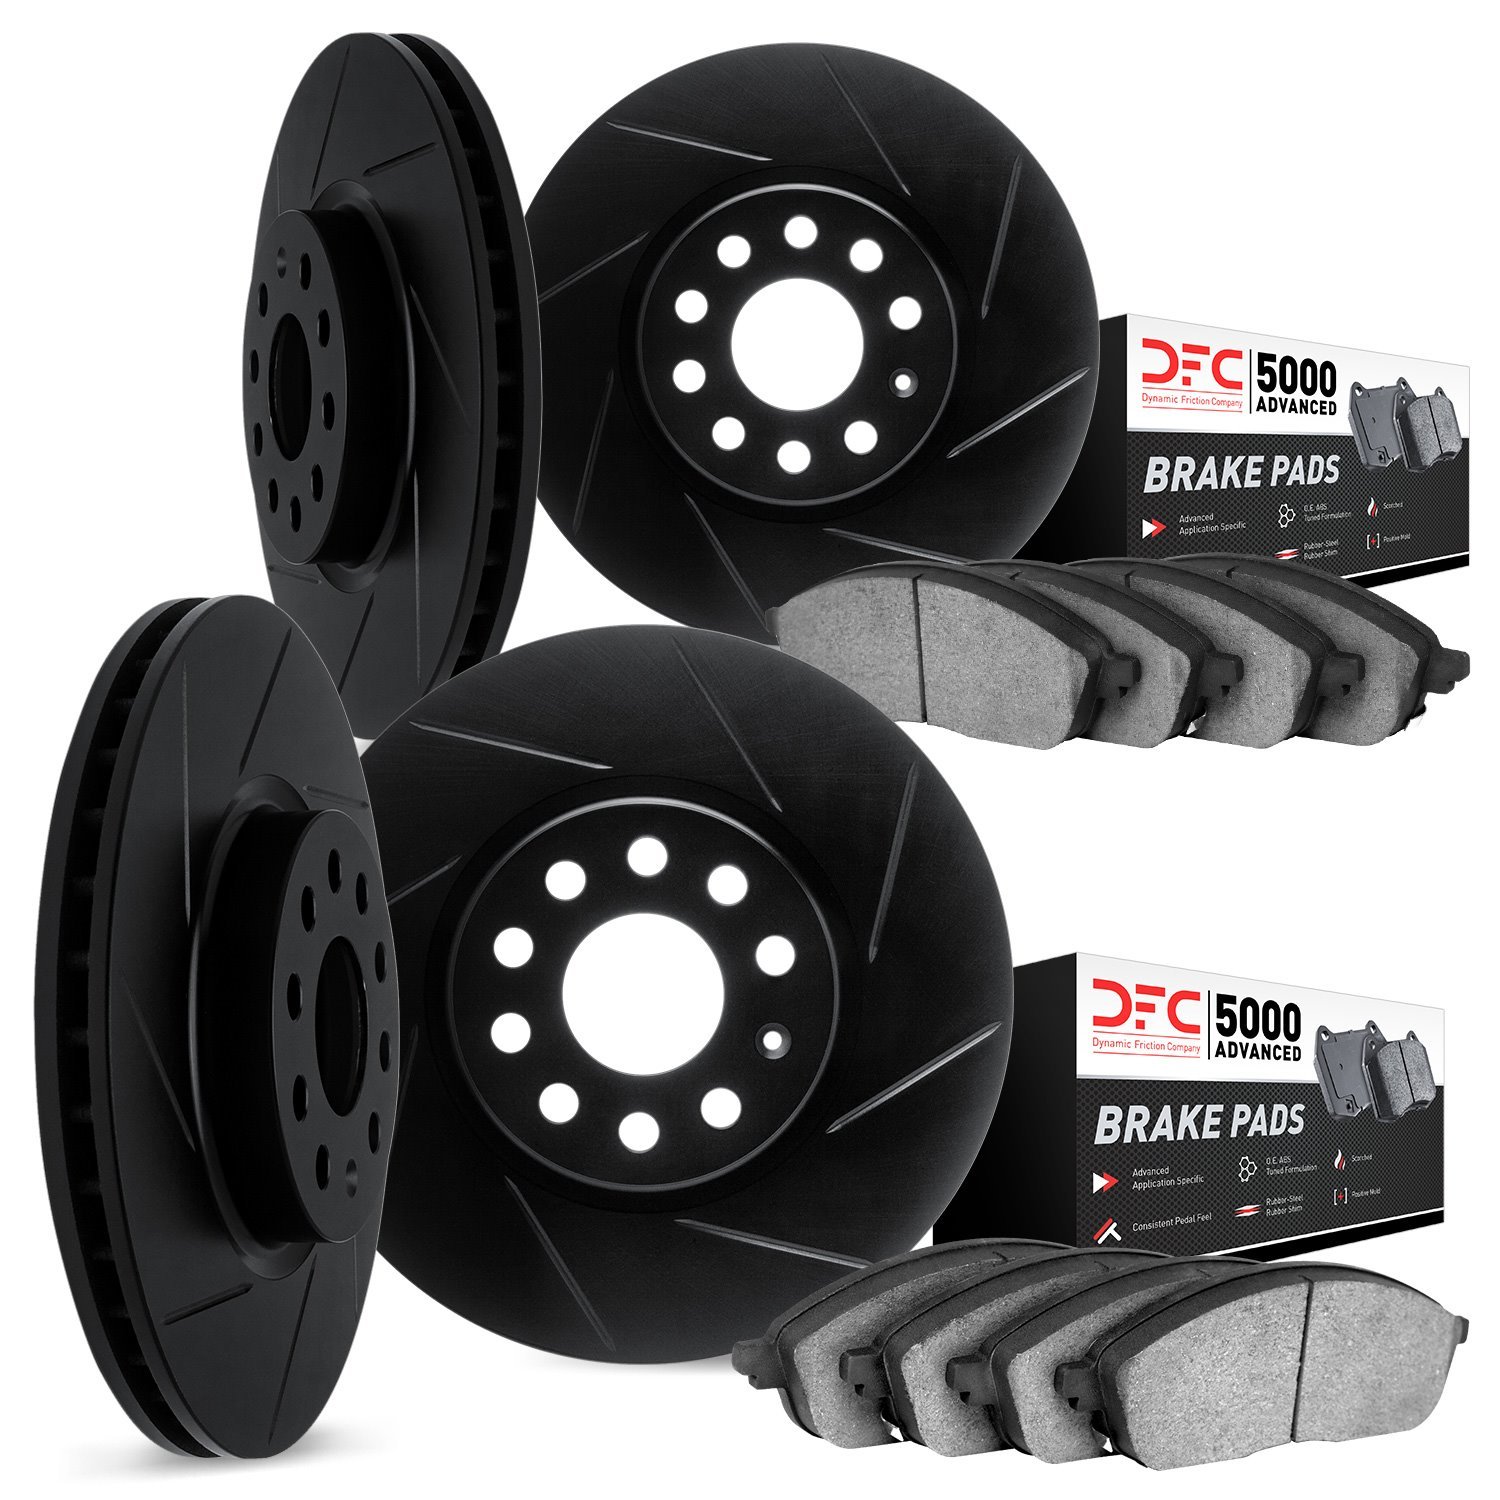 3514-31067 Slotted Brake Rotors w/5000 Advanced Brake Pads Kit & Hardware [Black], 2007-2013 BMW, Position: Front and Rear